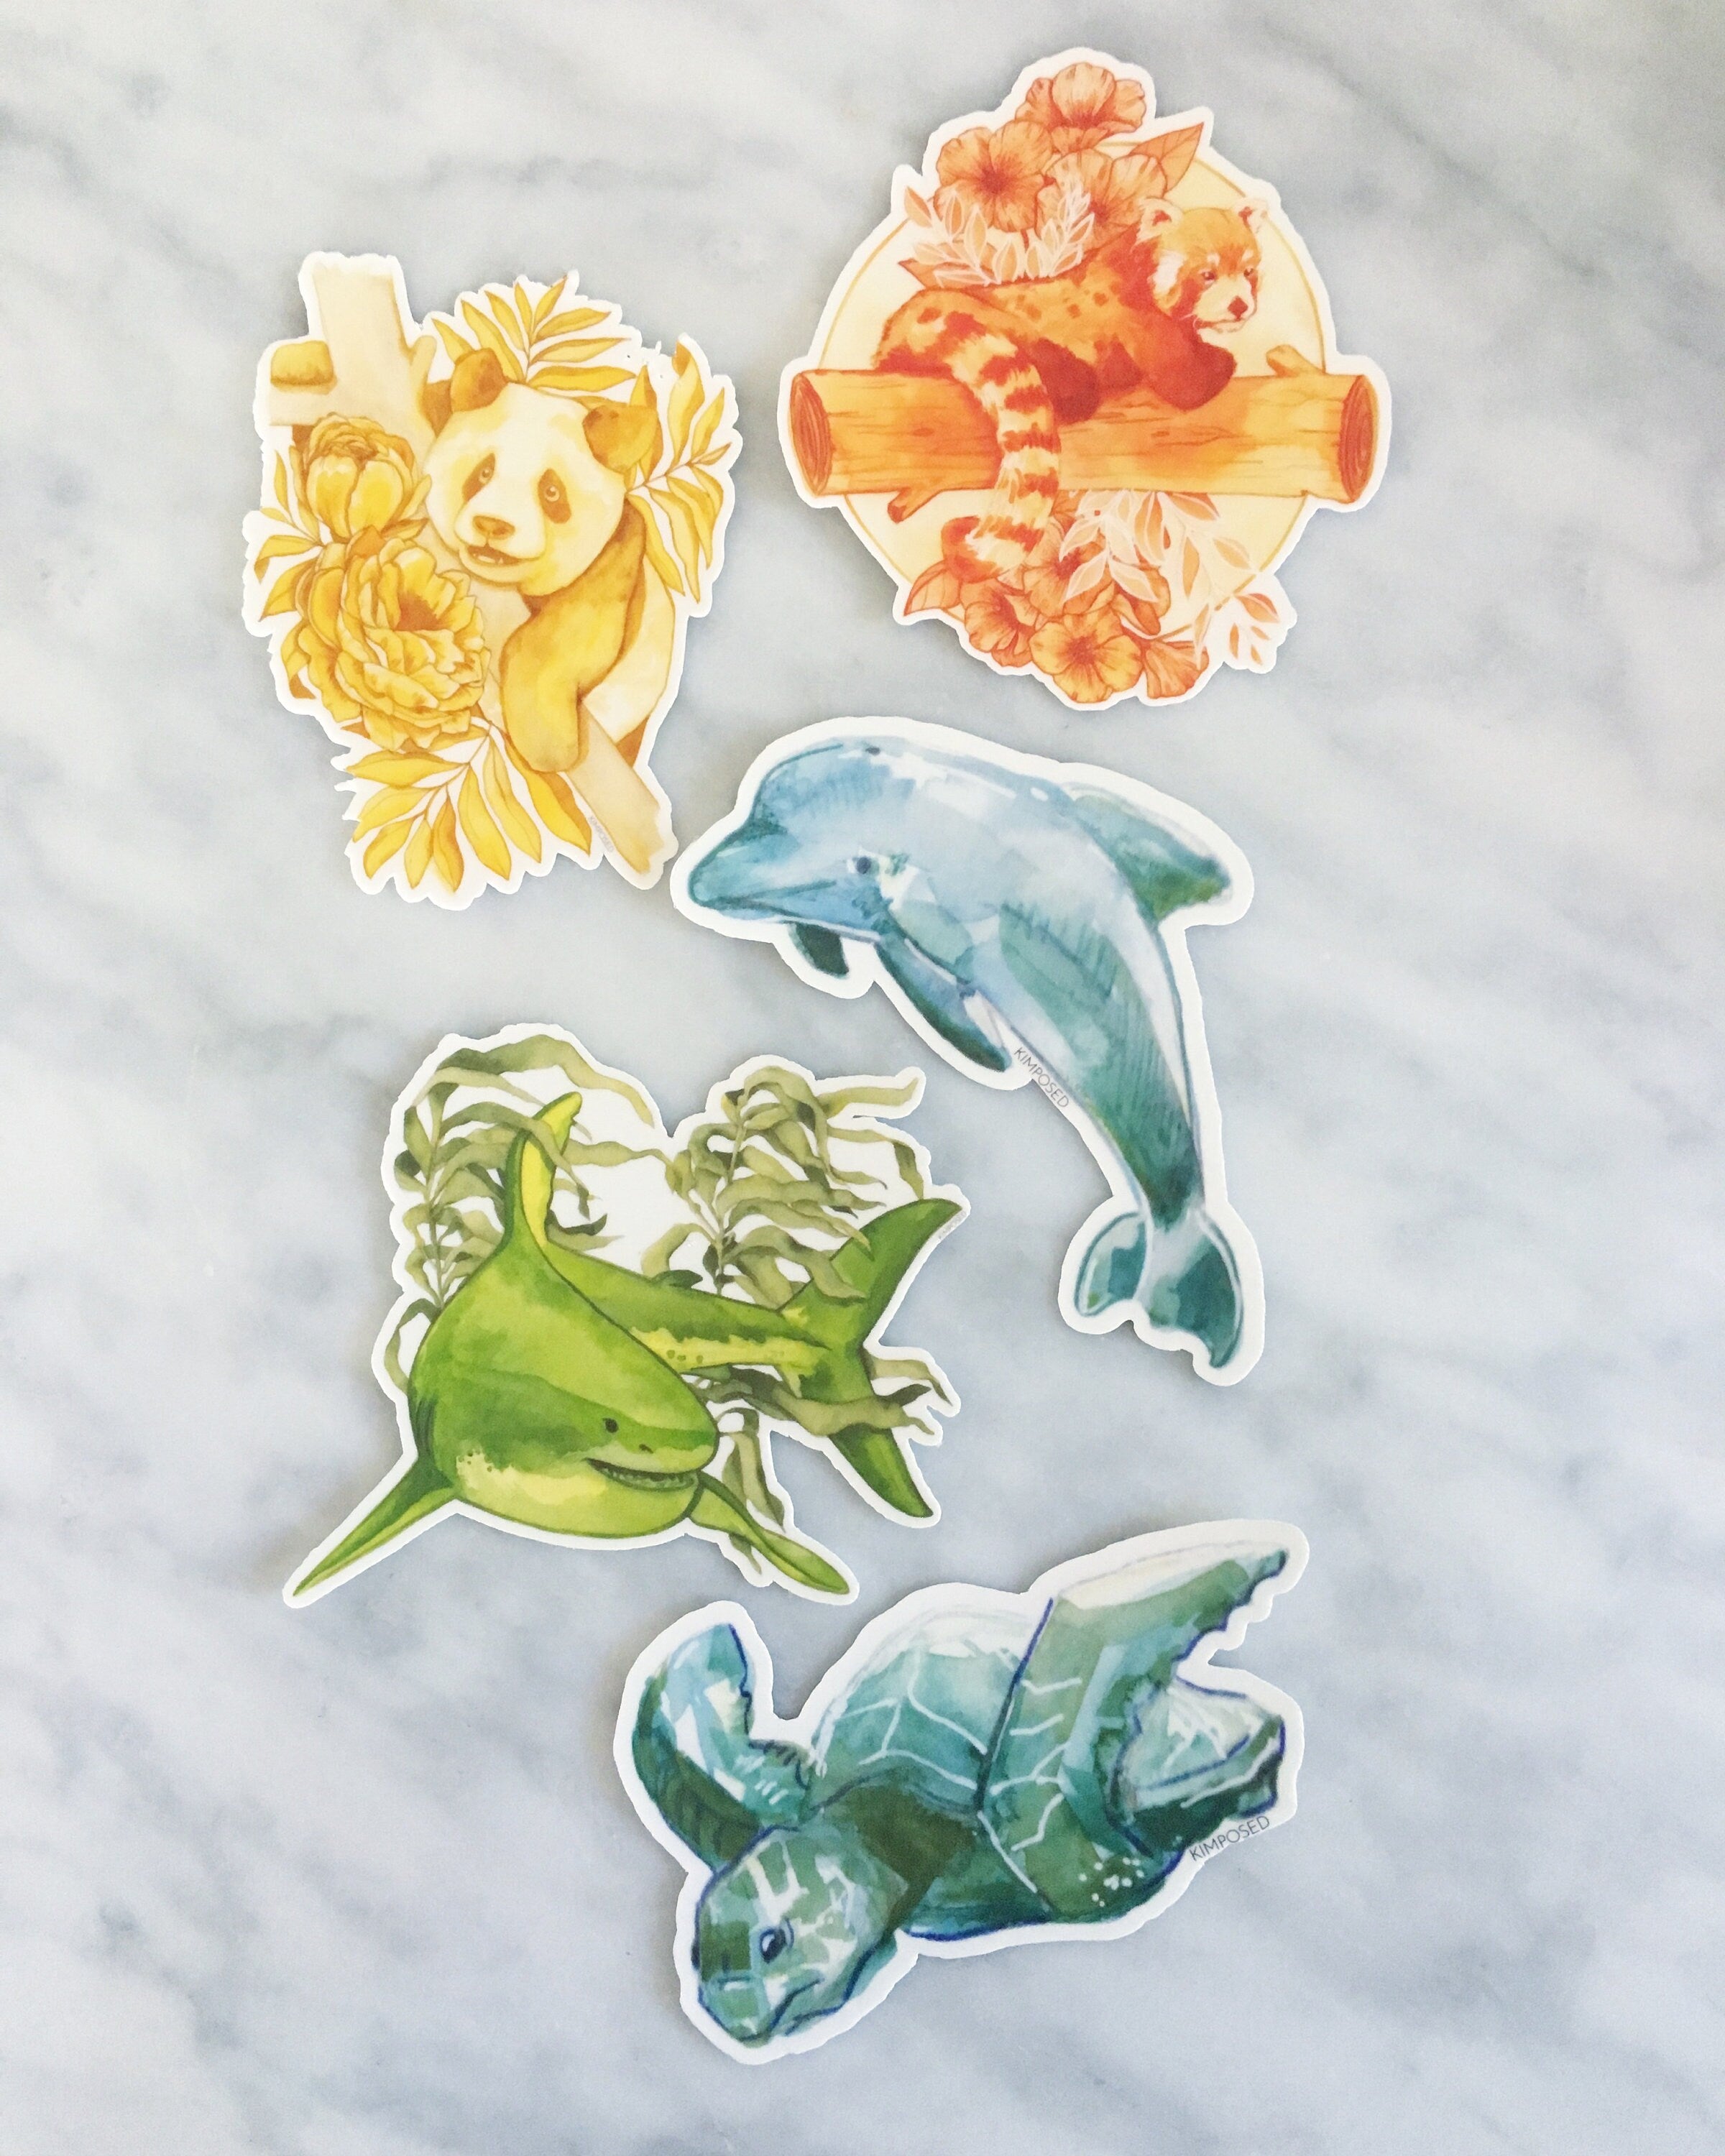 Watercolor Sea Turtle 3" Waterproof Vinyl Sticker for Water Bottles, Laptops, Phones & More **FREE USA SHIPPING**